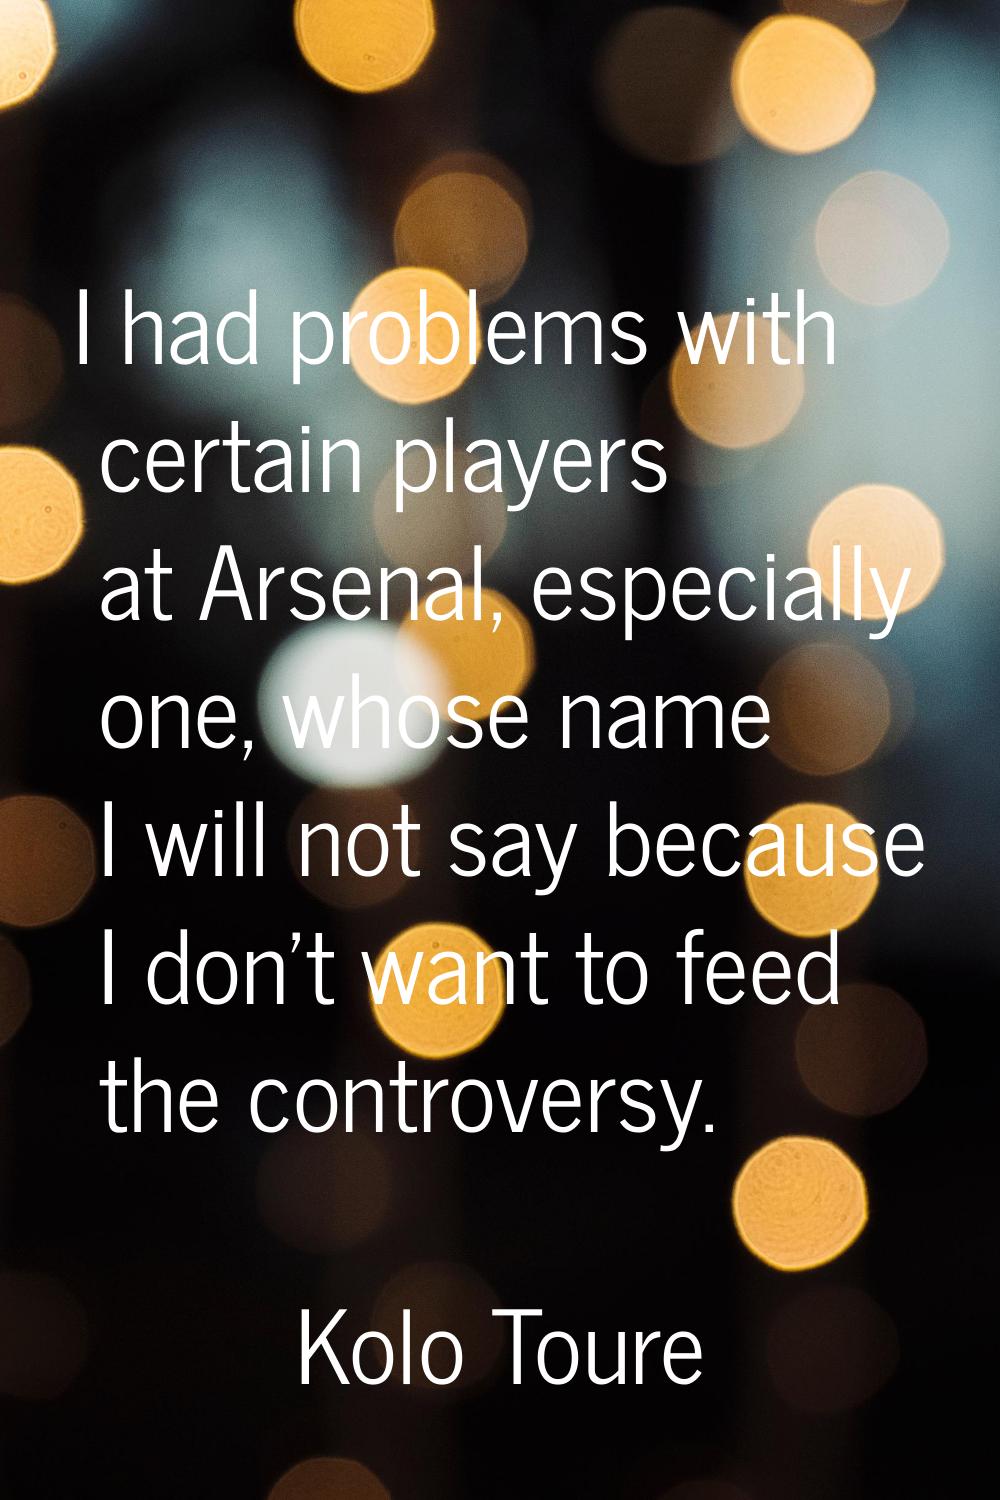 I had problems with certain players at Arsenal, especially one, whose name I will not say because I